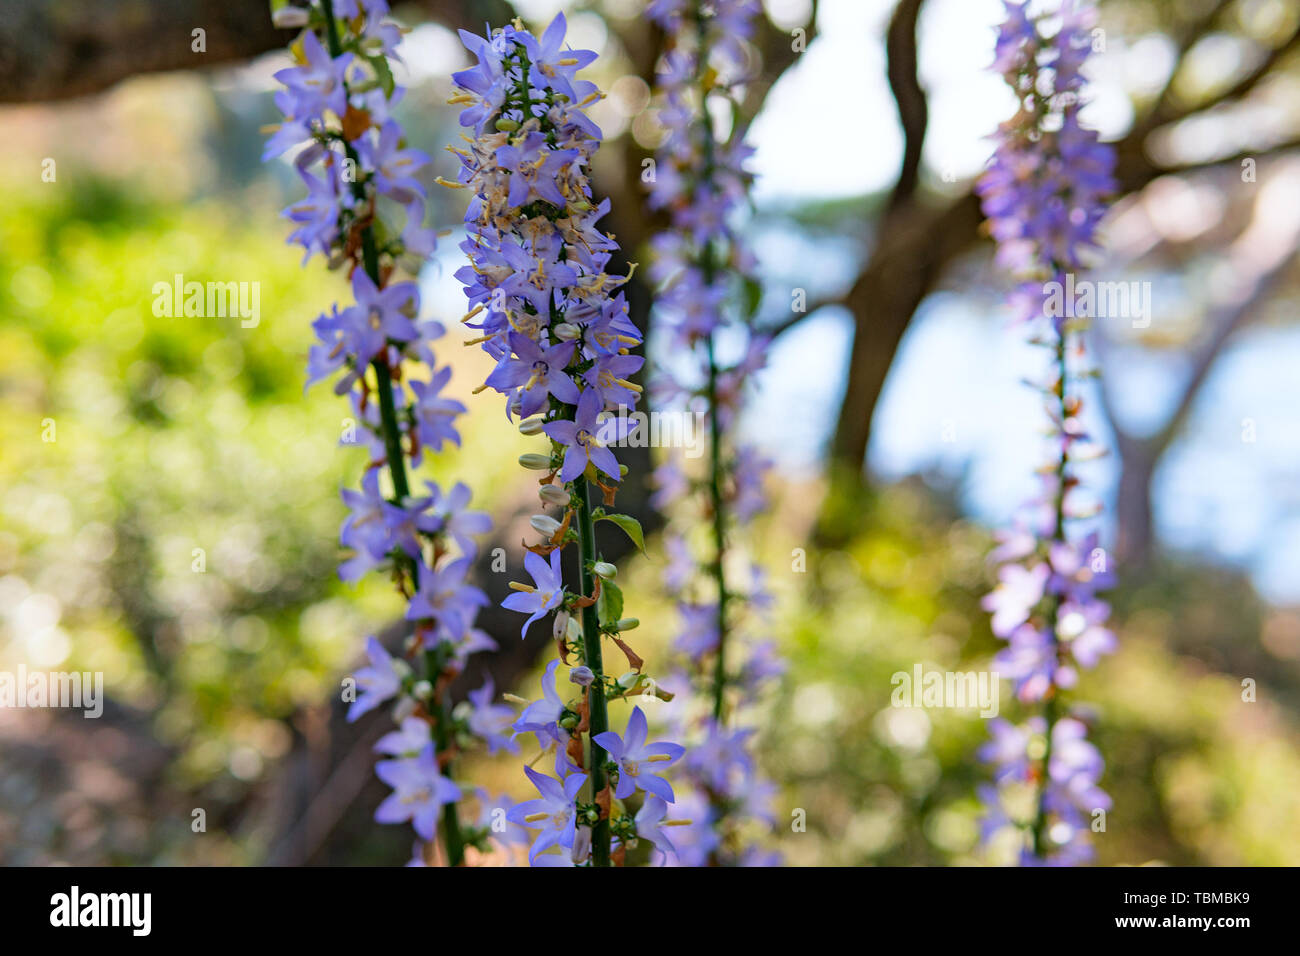 Purple flowers of Hyssopus officinalis (Hyssop) close up. Stock Photo